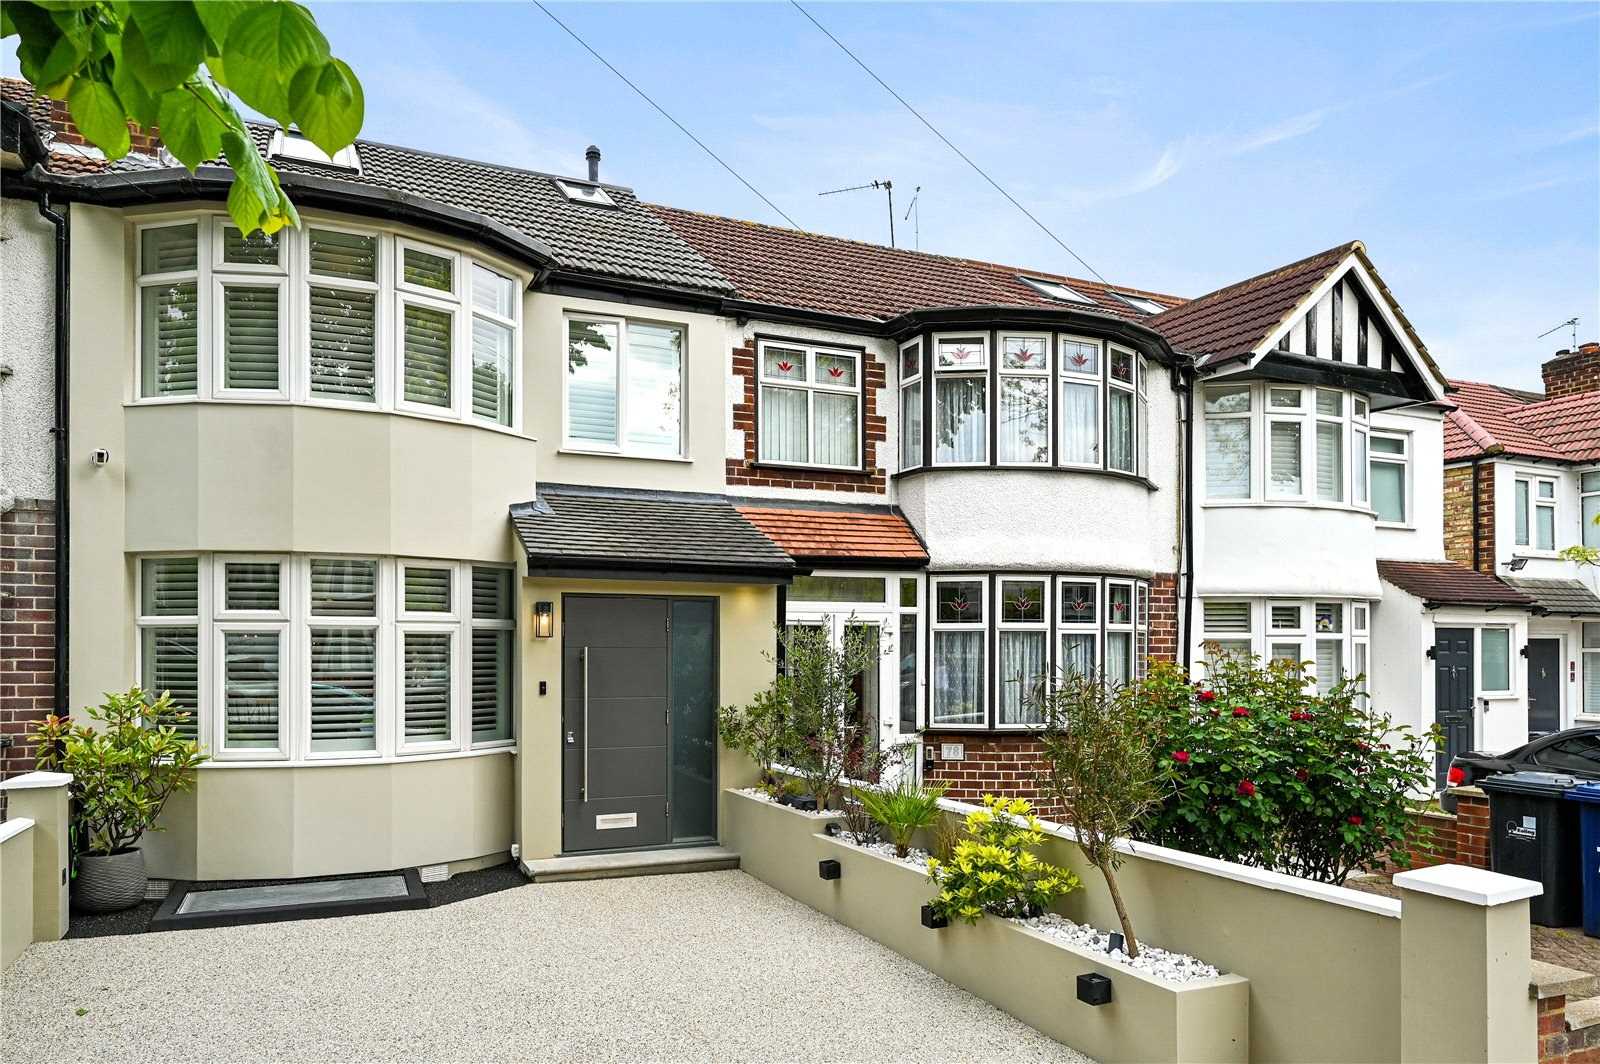 House in Perivale, Thames Avenue 11854453